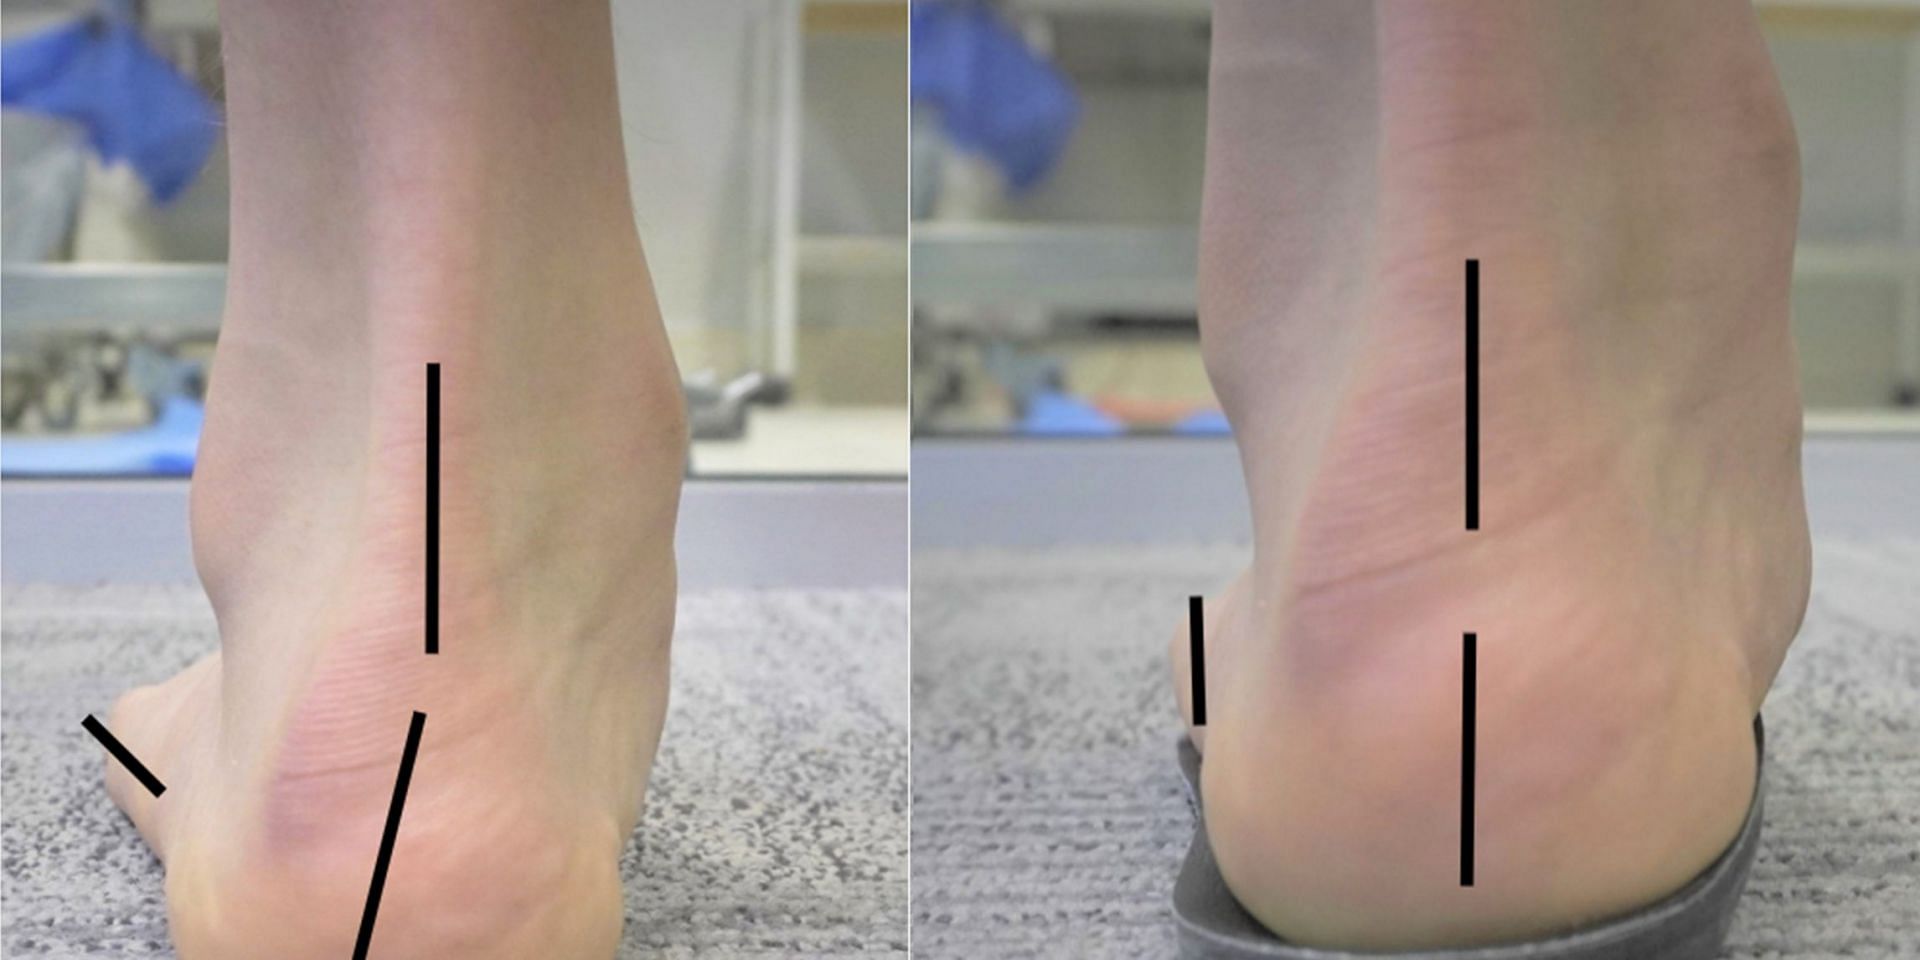 High heels can also cause plantar fasciitis. (Image via Adelaide Foot and Ankle)